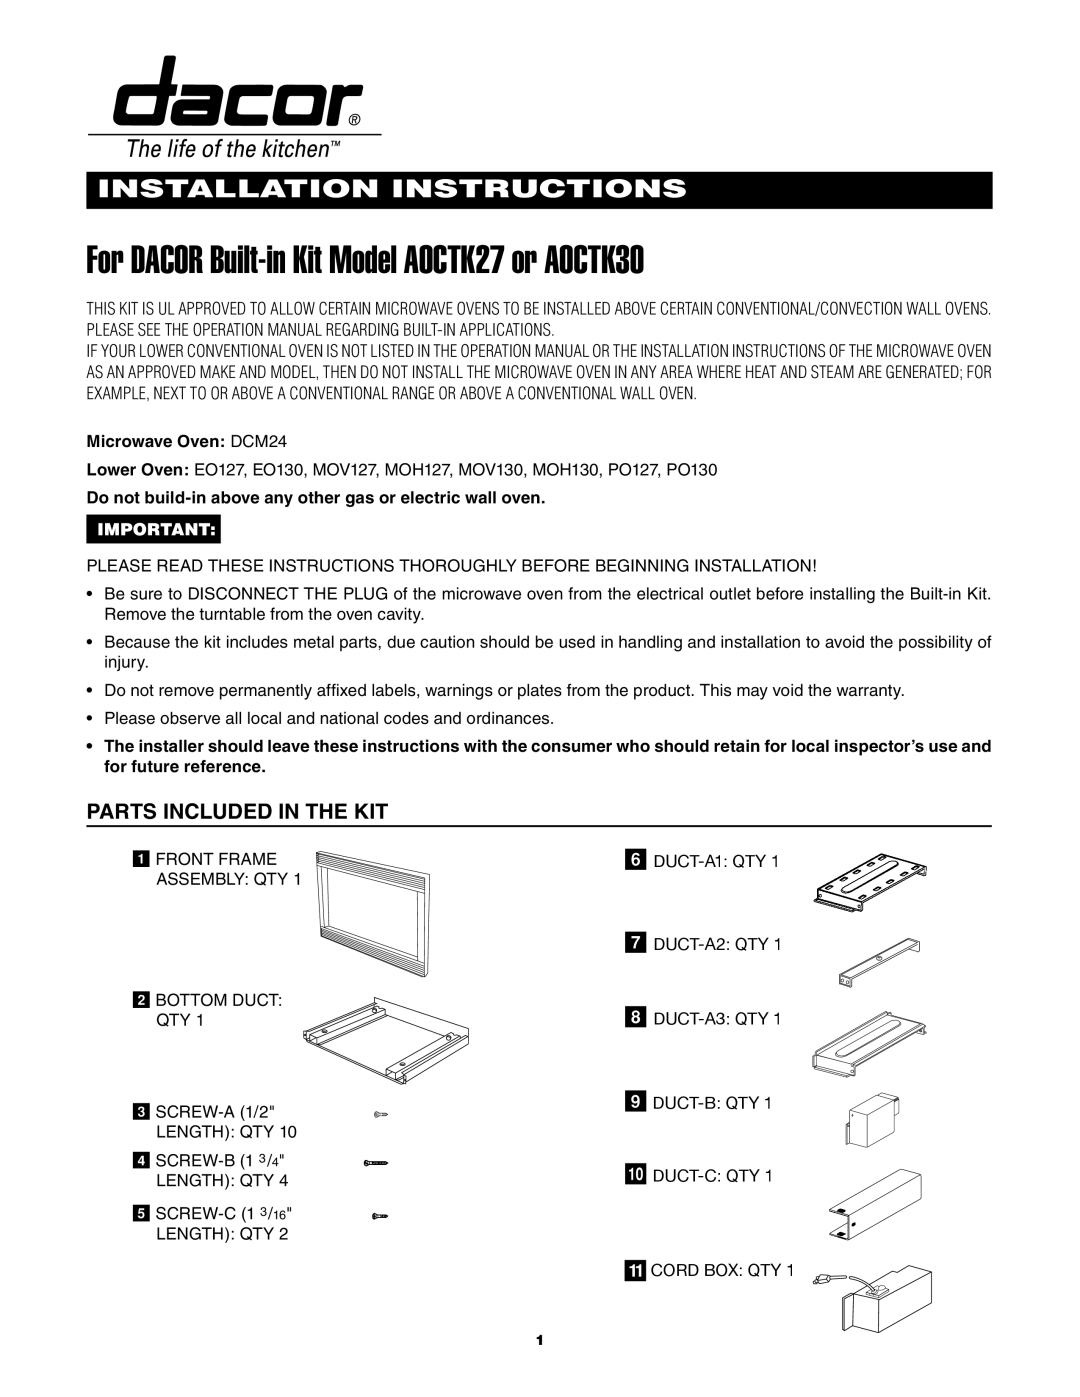 Dacor installation instructions For DACOR Built-in Kit Model AOCTK27 or AOCTK30, Installation Instructions 